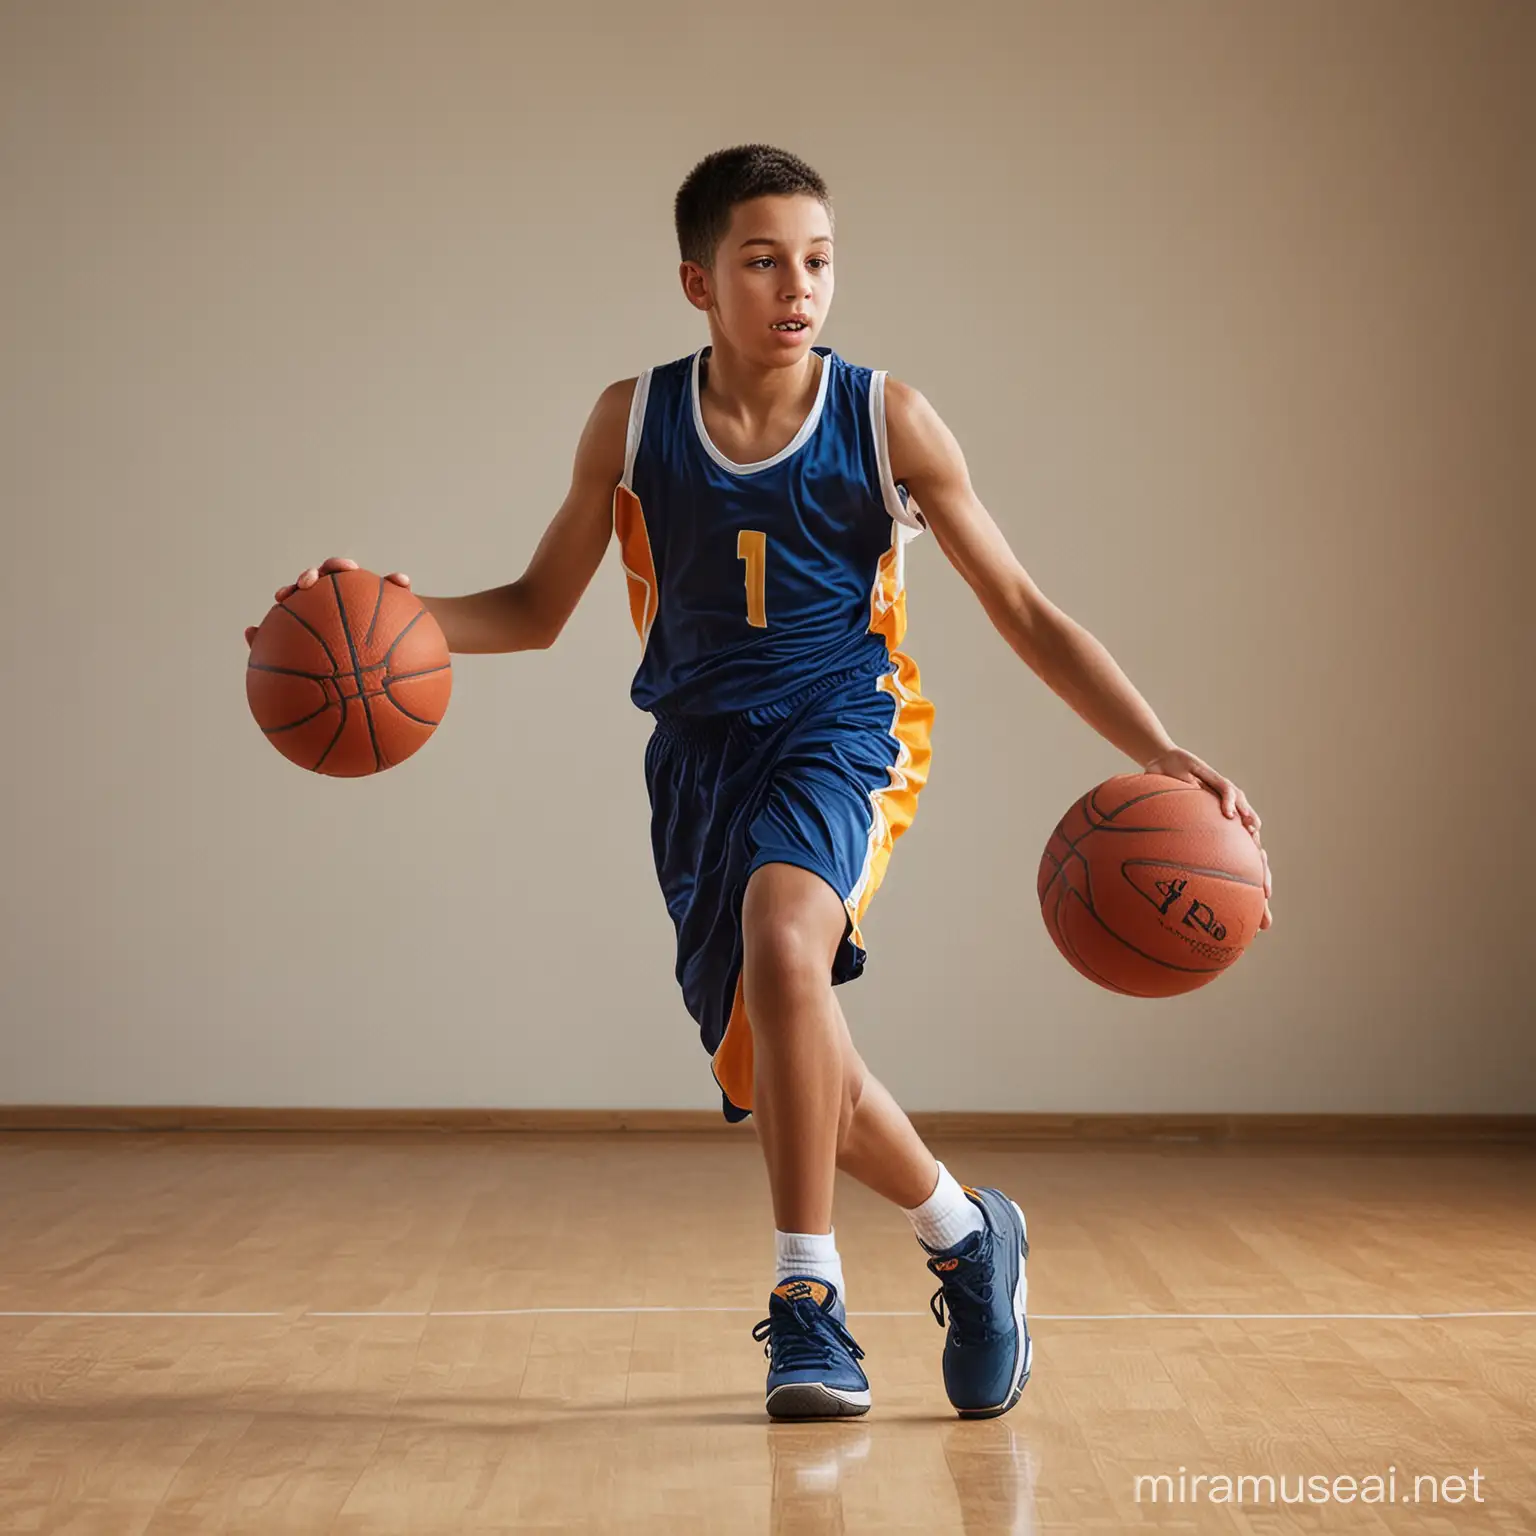 Energetic 11YearOld Boy Basketball Player in Action